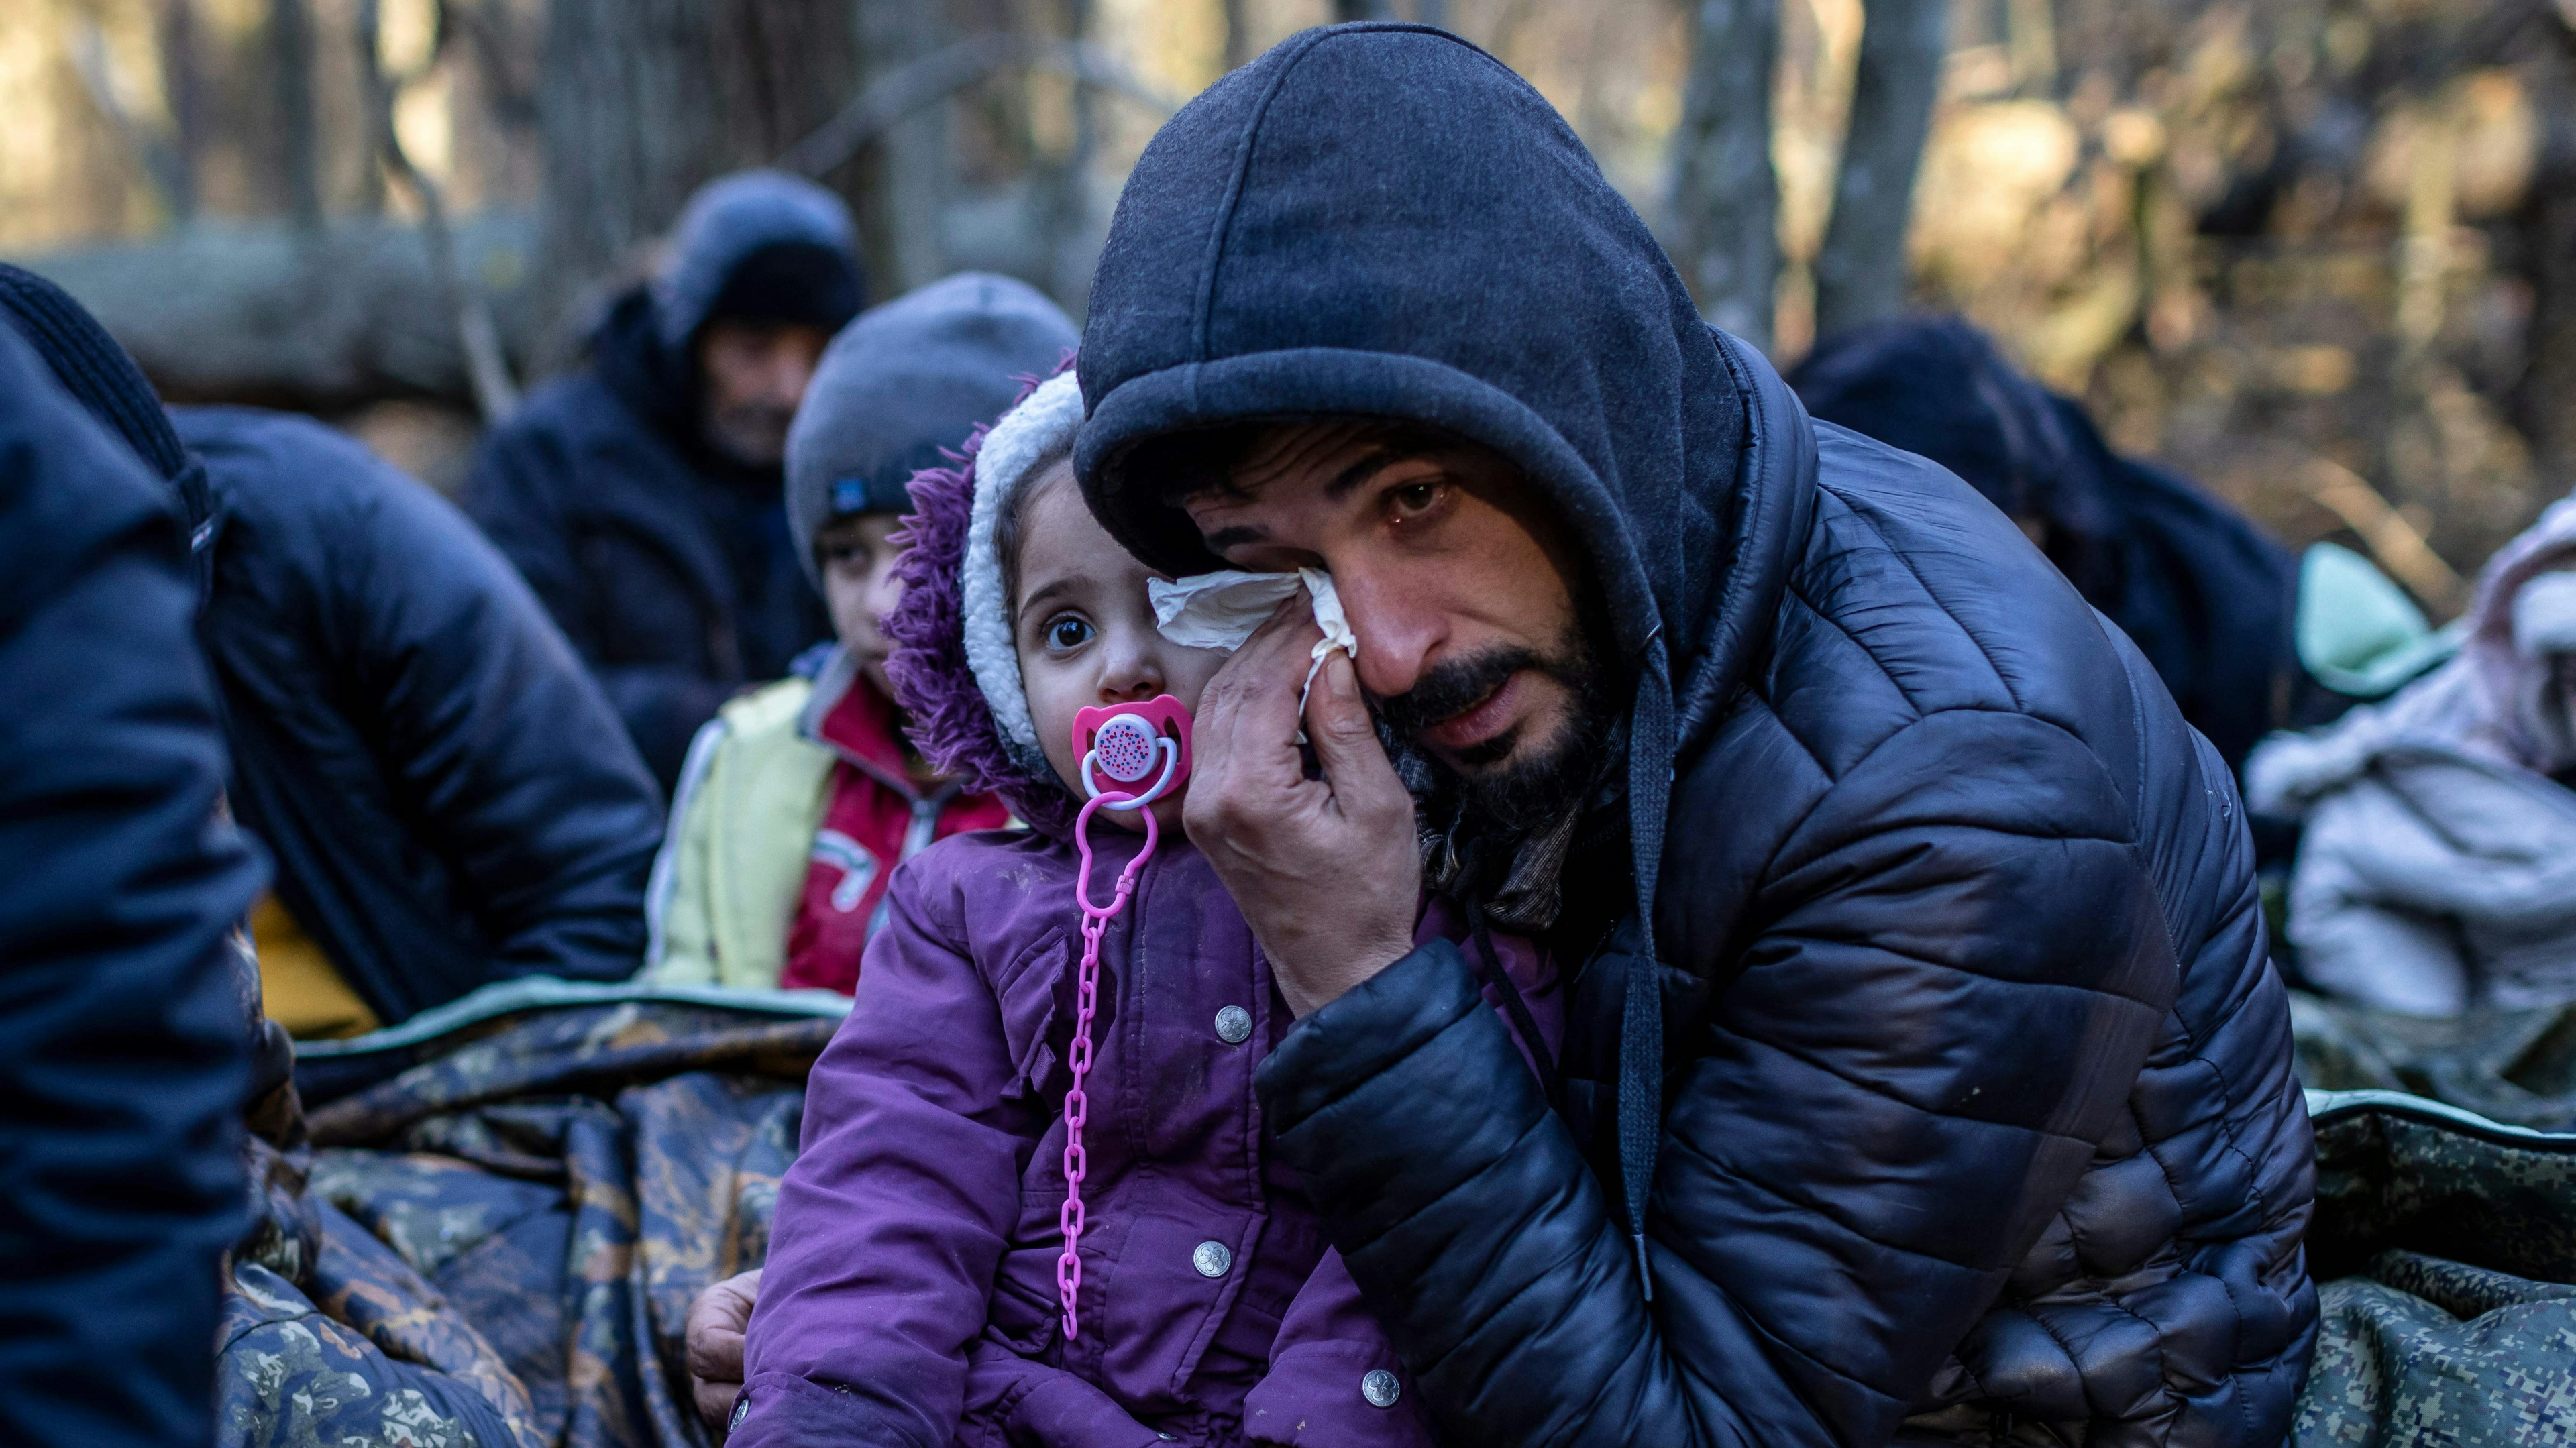 A man holding a child reacts as the members of the Kurdish family from Dohuk in Iraq wait for the border guard patrol, near Narewka, Poland